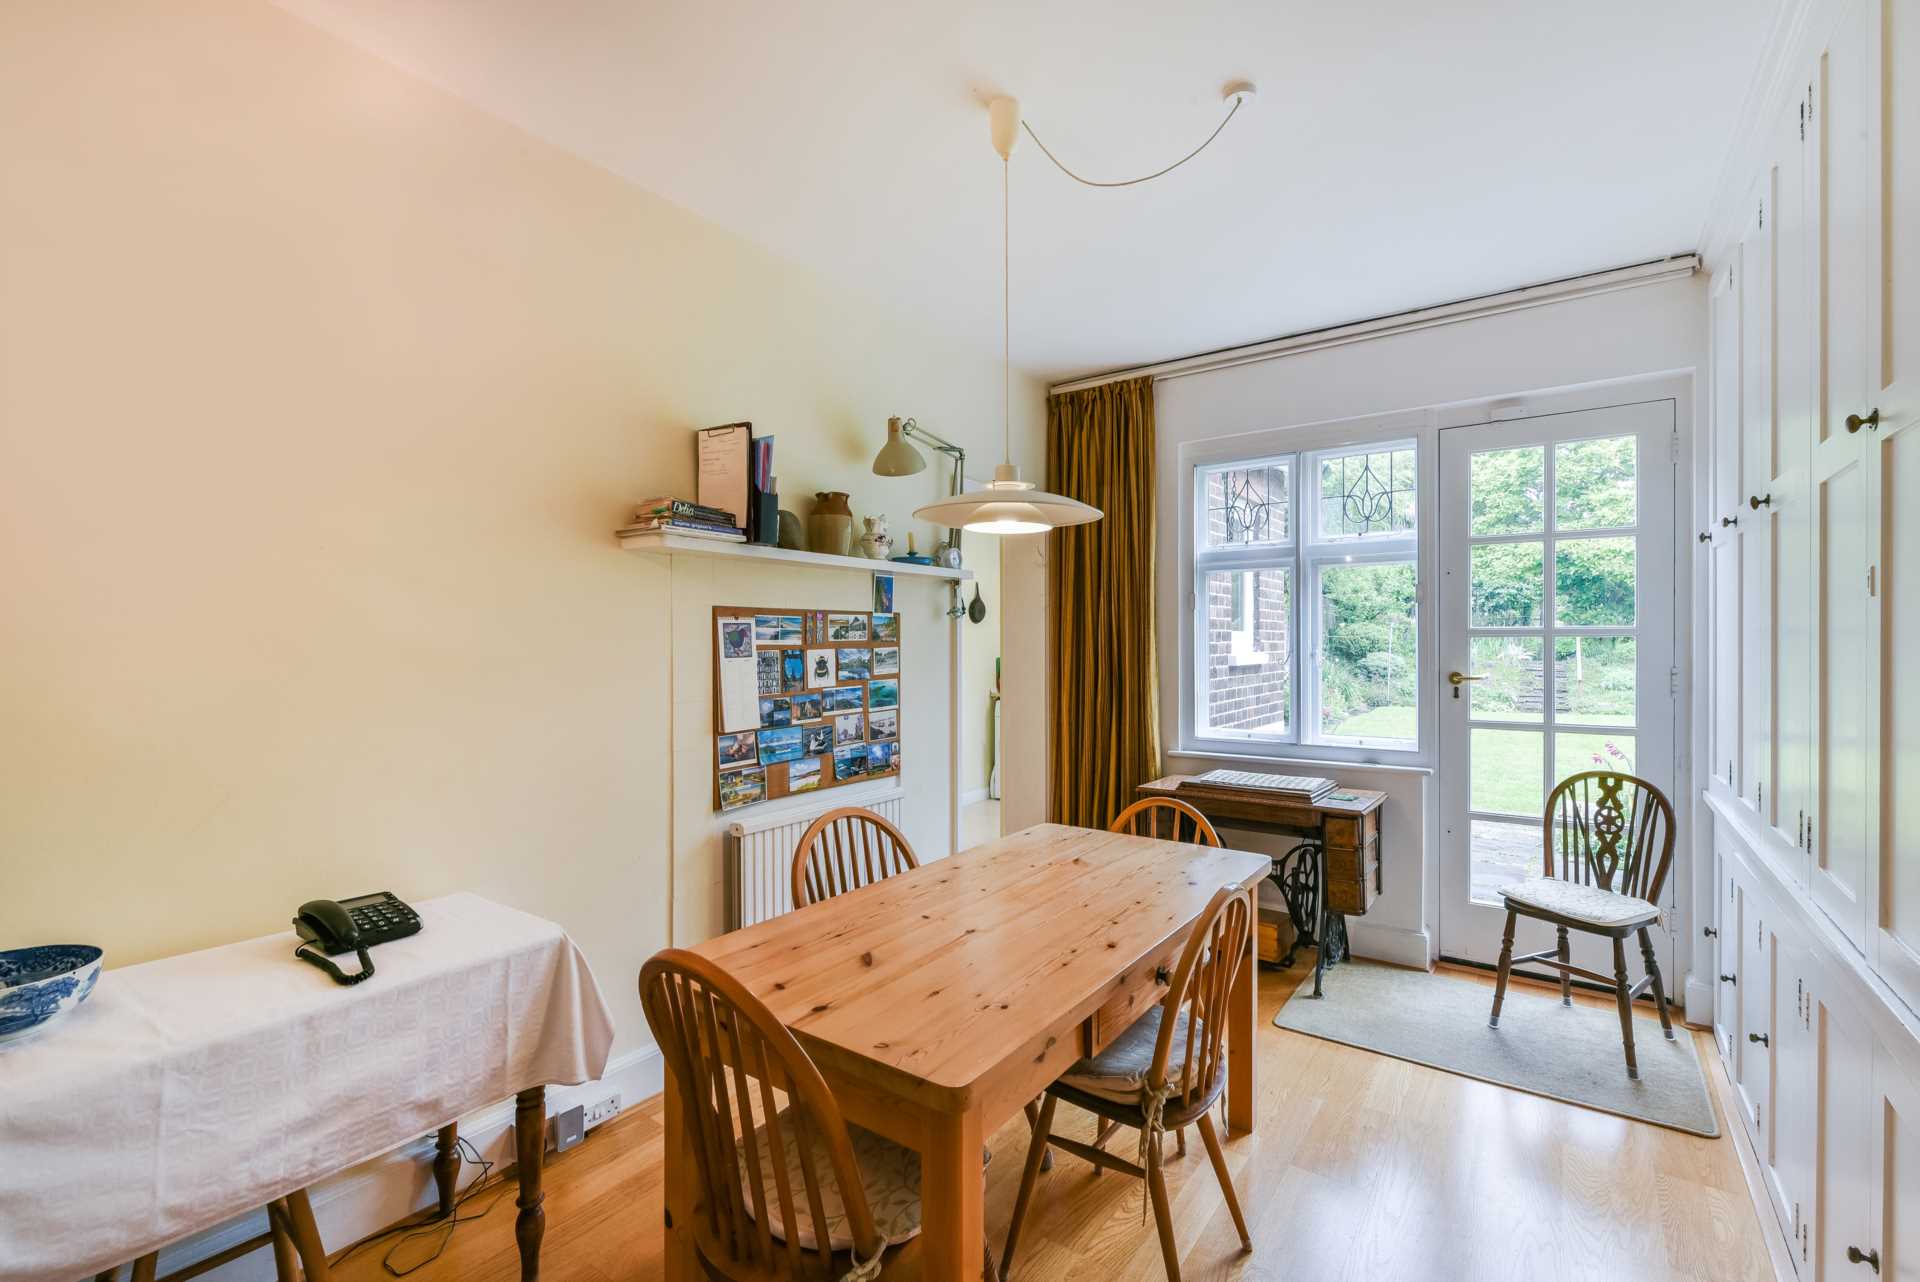 East Dulwich Grove, Dulwich, SE22 8SY, Image 6